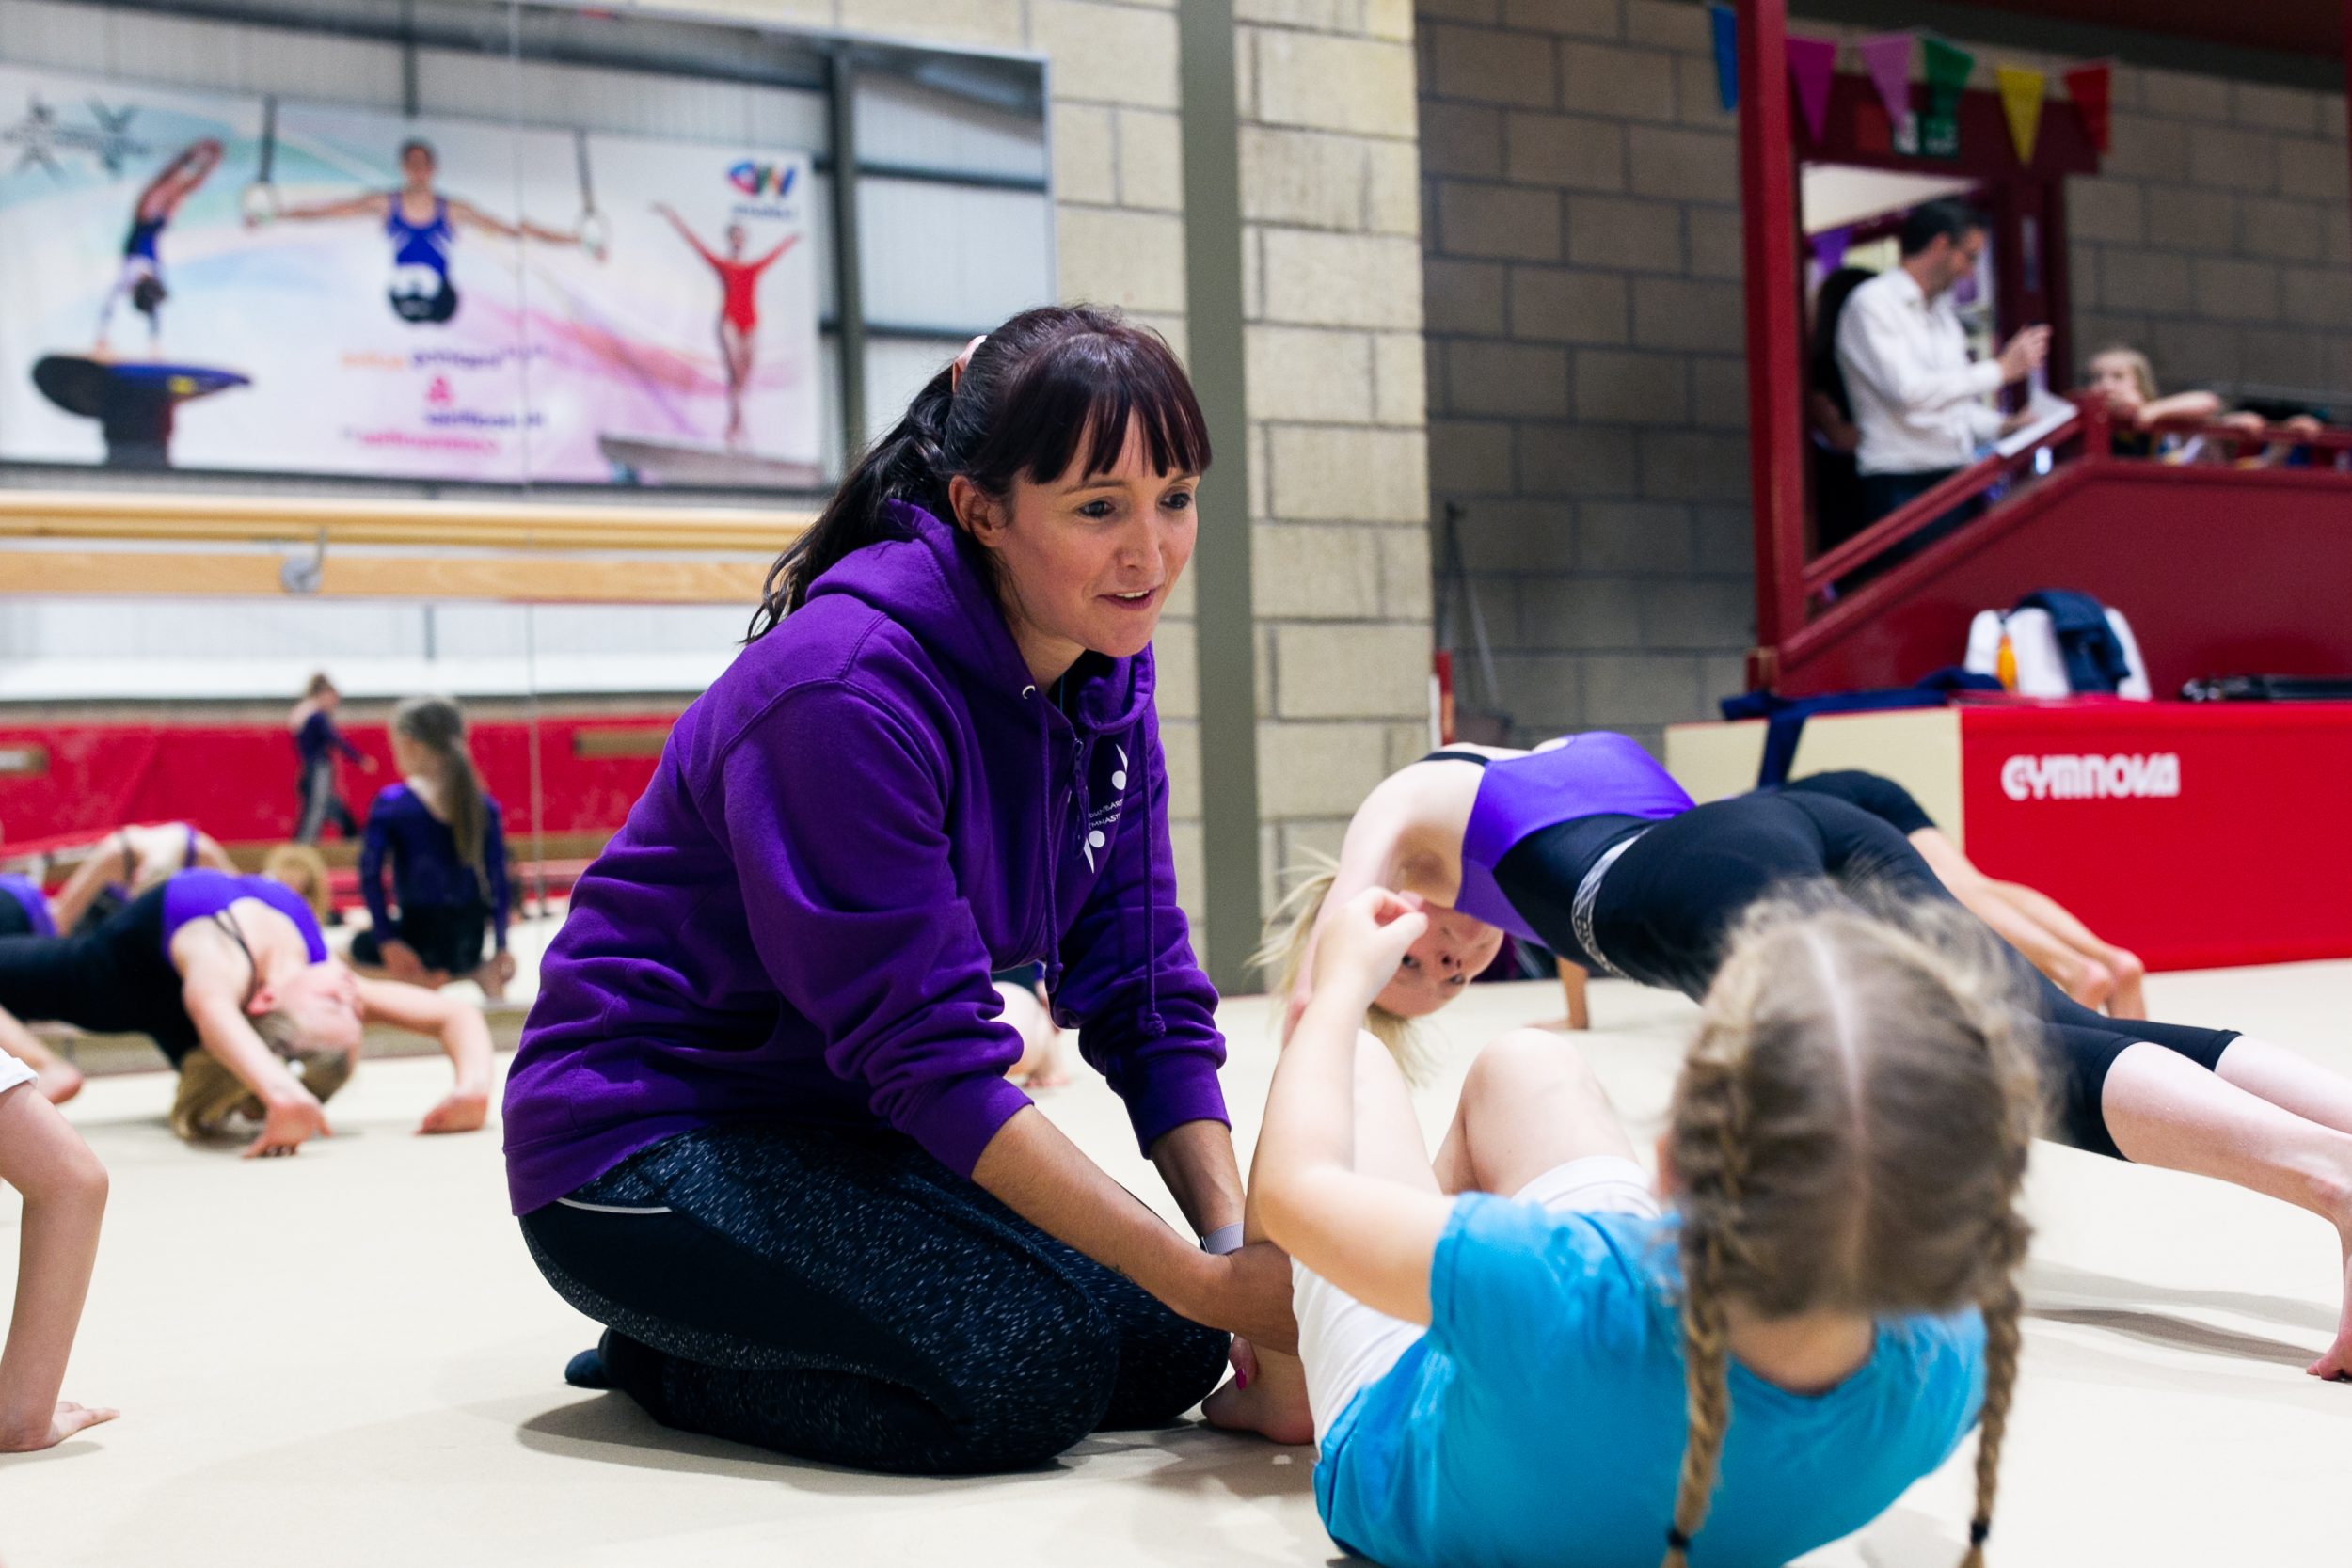 A coach delivers training for school age gymnasts